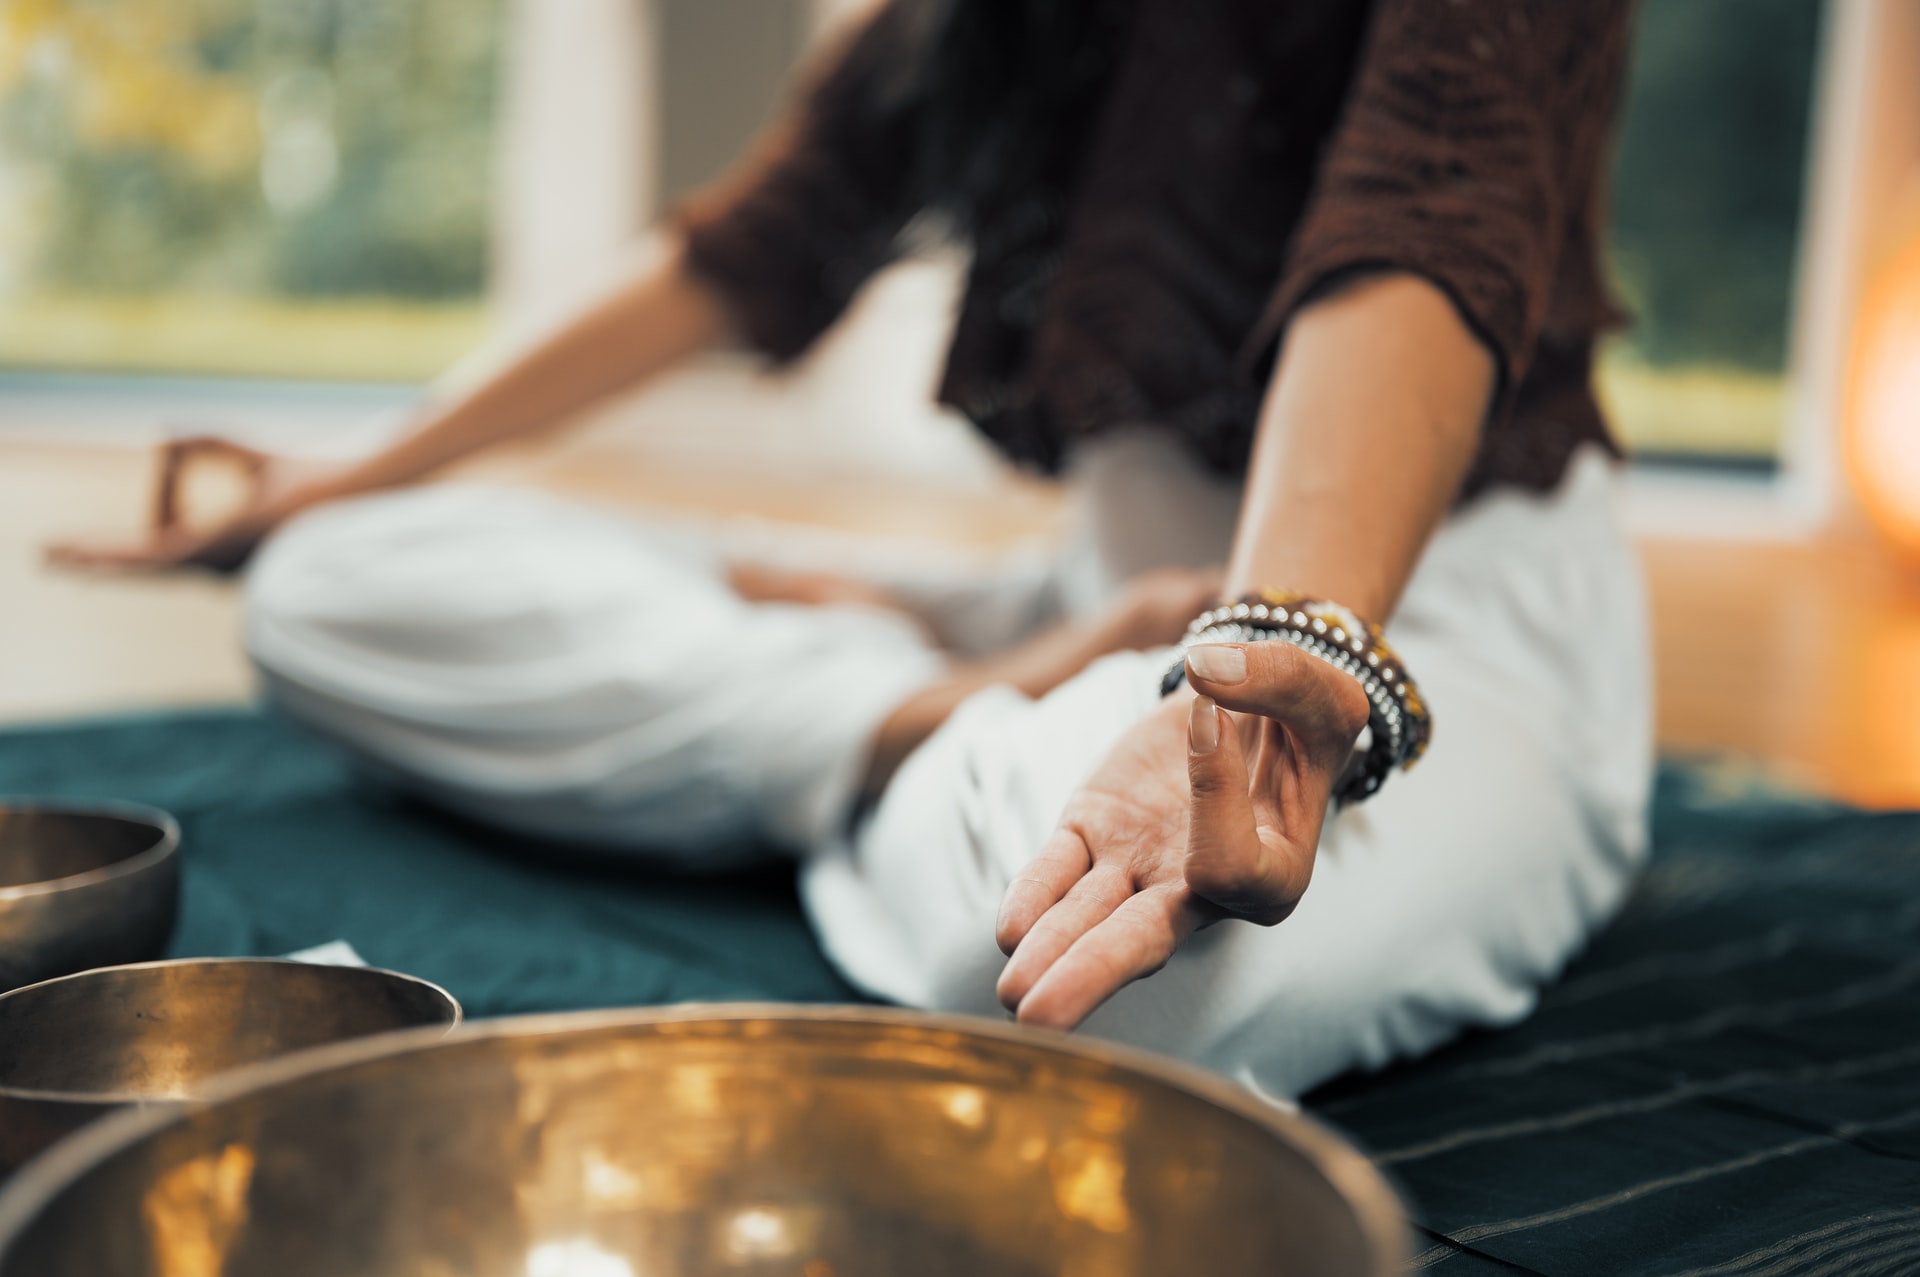 are sound baths good to do before bed?